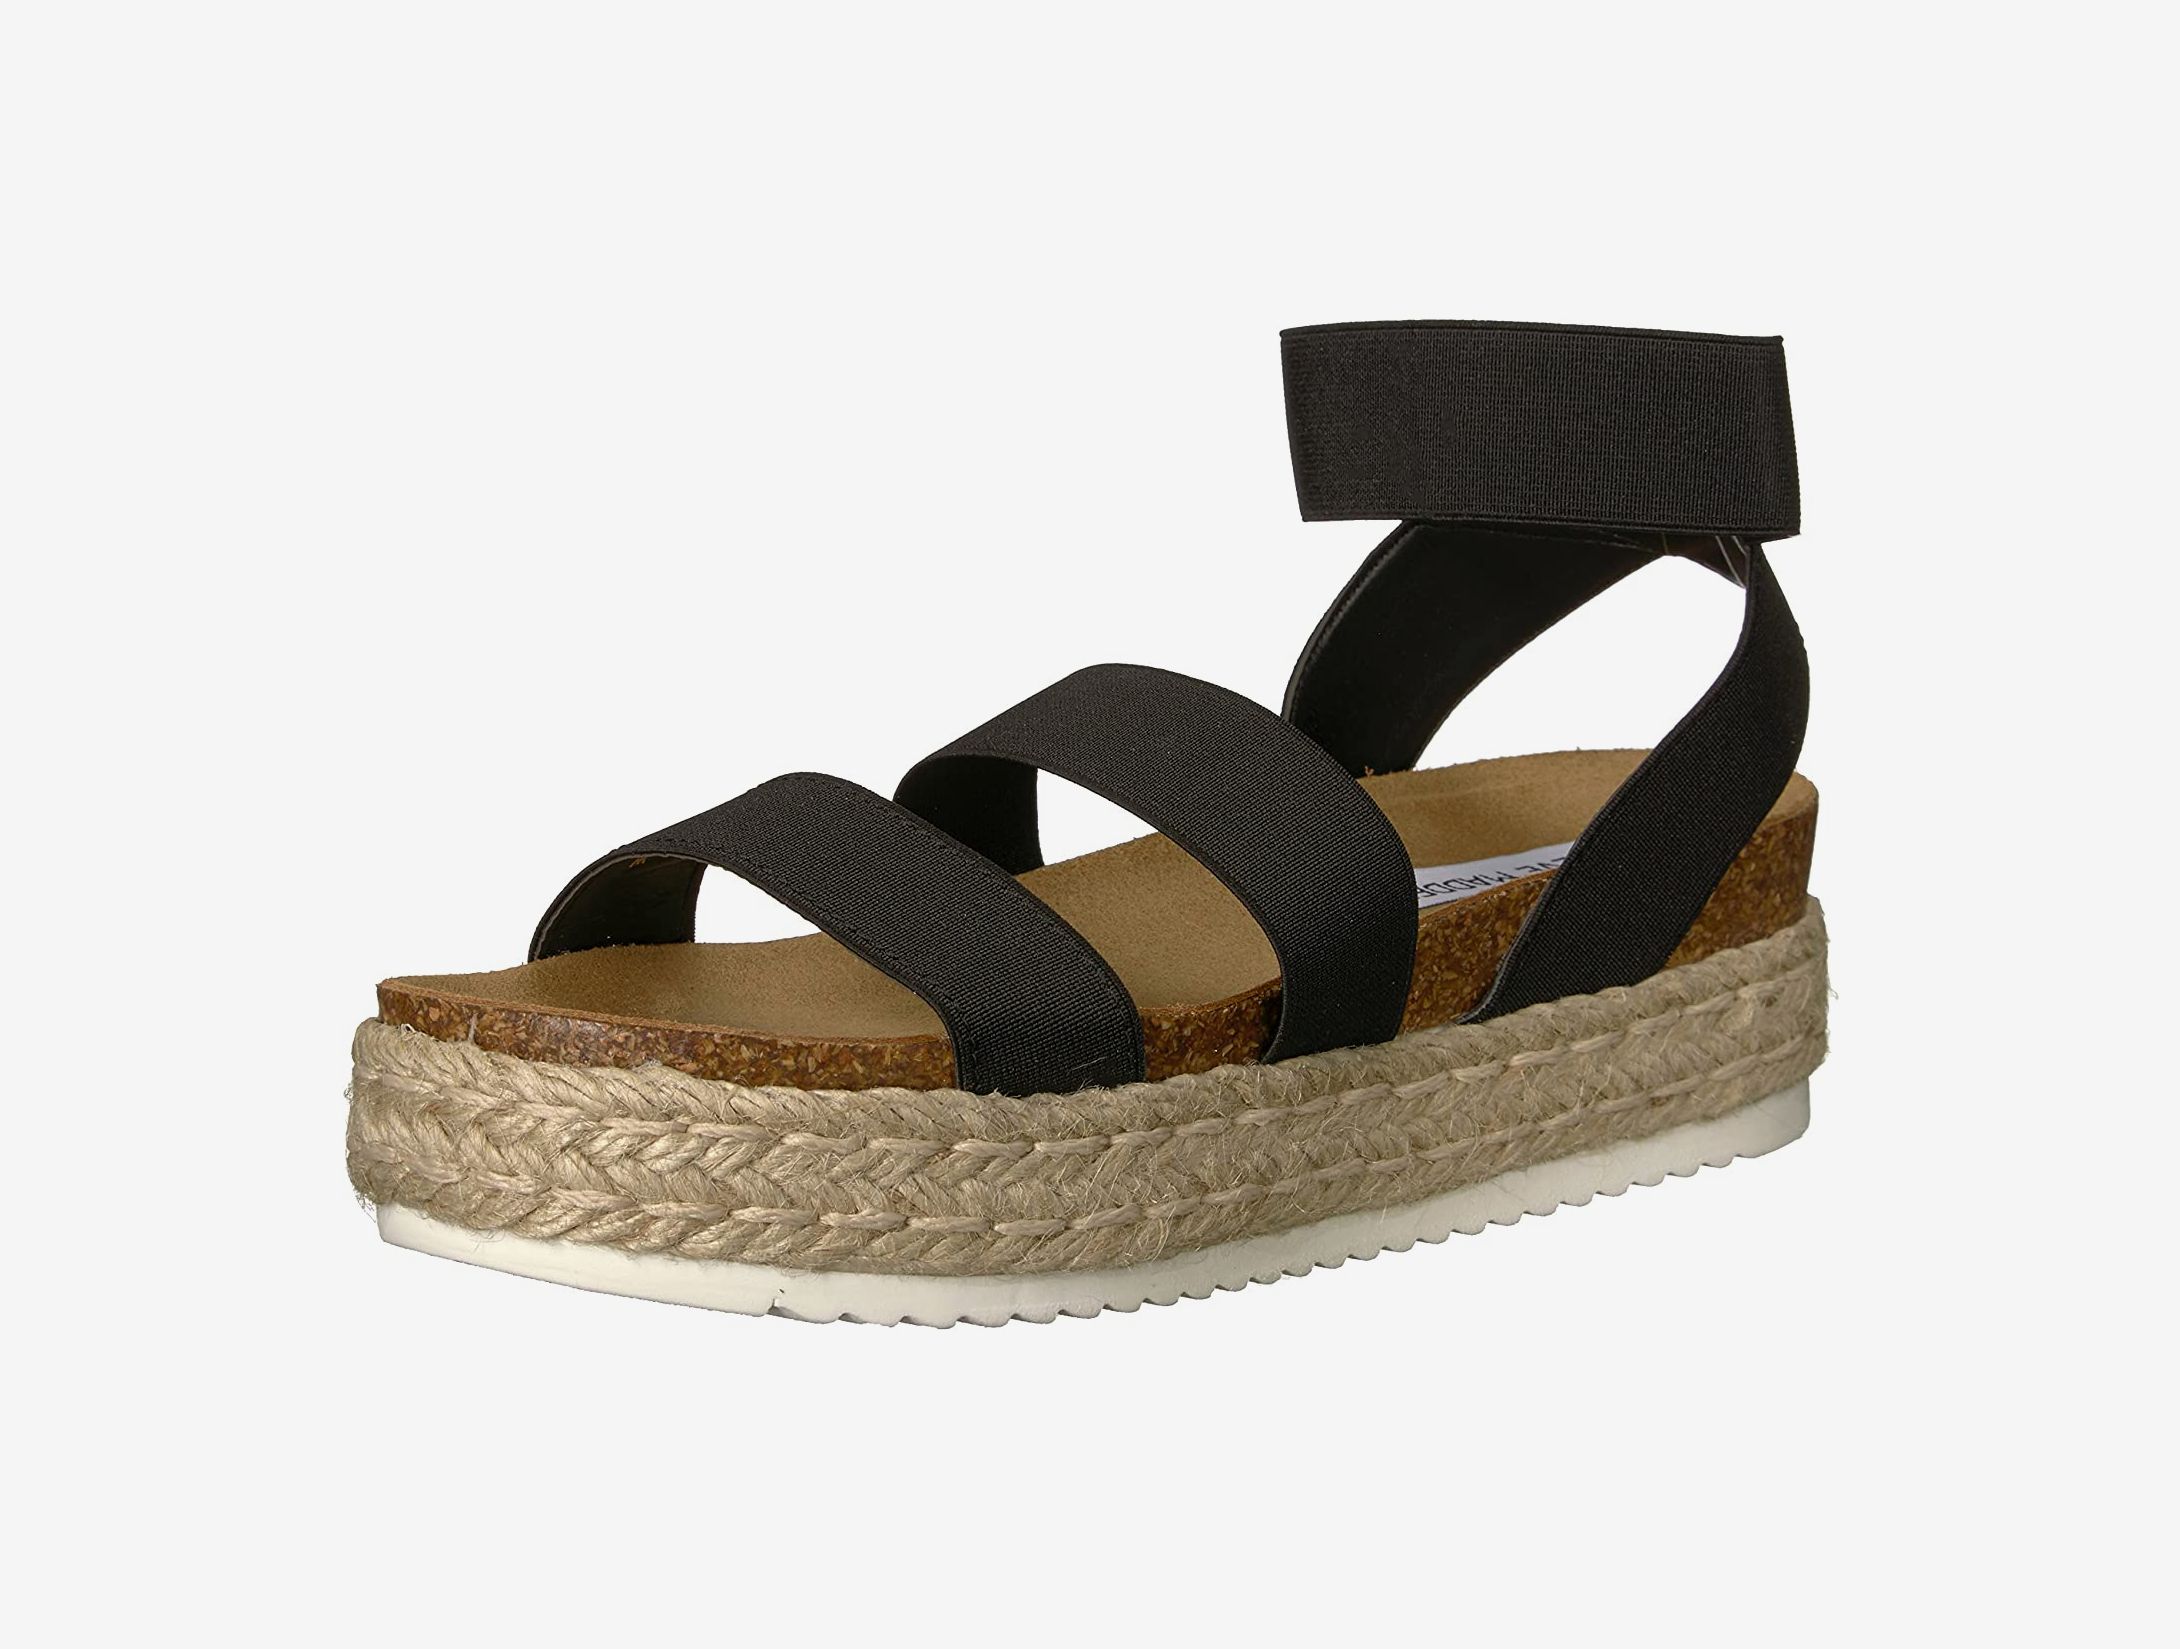 BAMBOO Casual Strappy Easy Slip On Only Stylish Style Women Sandals Size New Without Box 